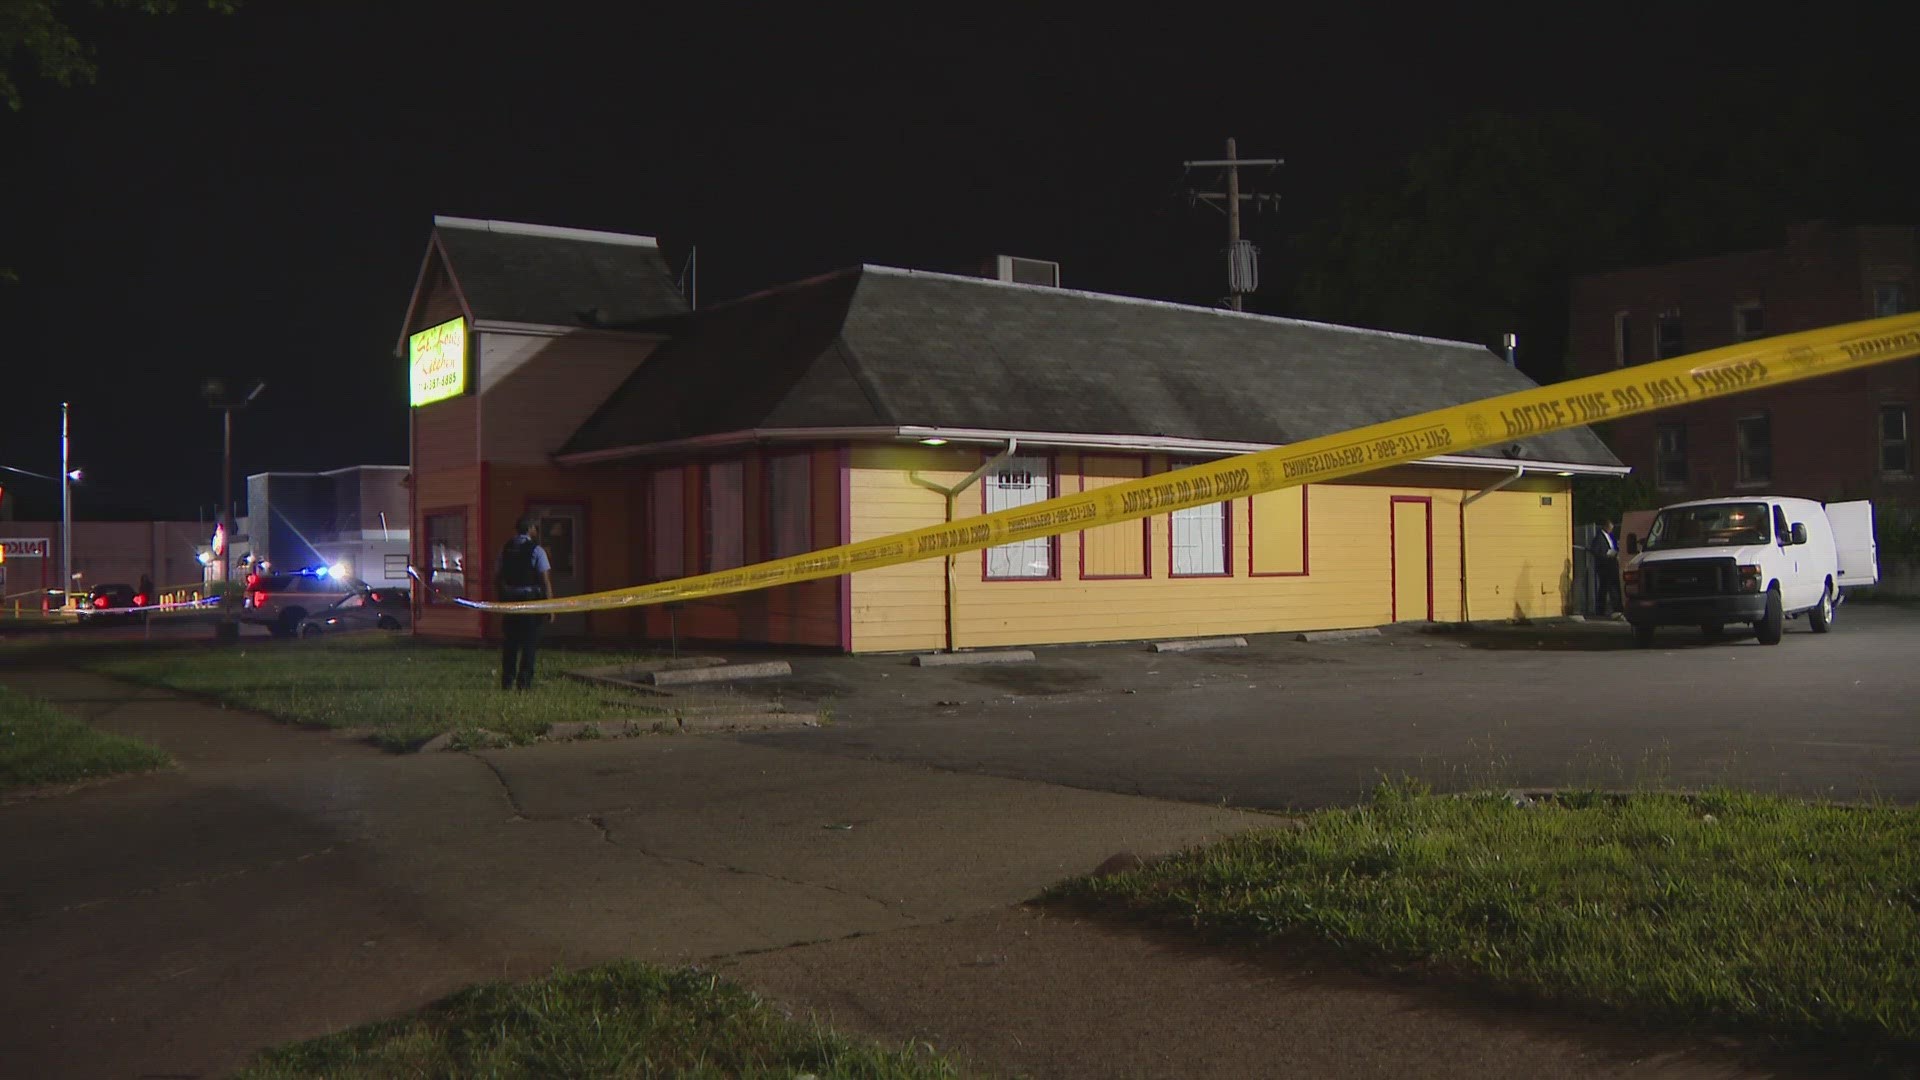 The family of victim who died in a shooting Tuesday night in north St. Louis is devastated. The deadly shooting happened at St. Louis Kitchen restaurant.